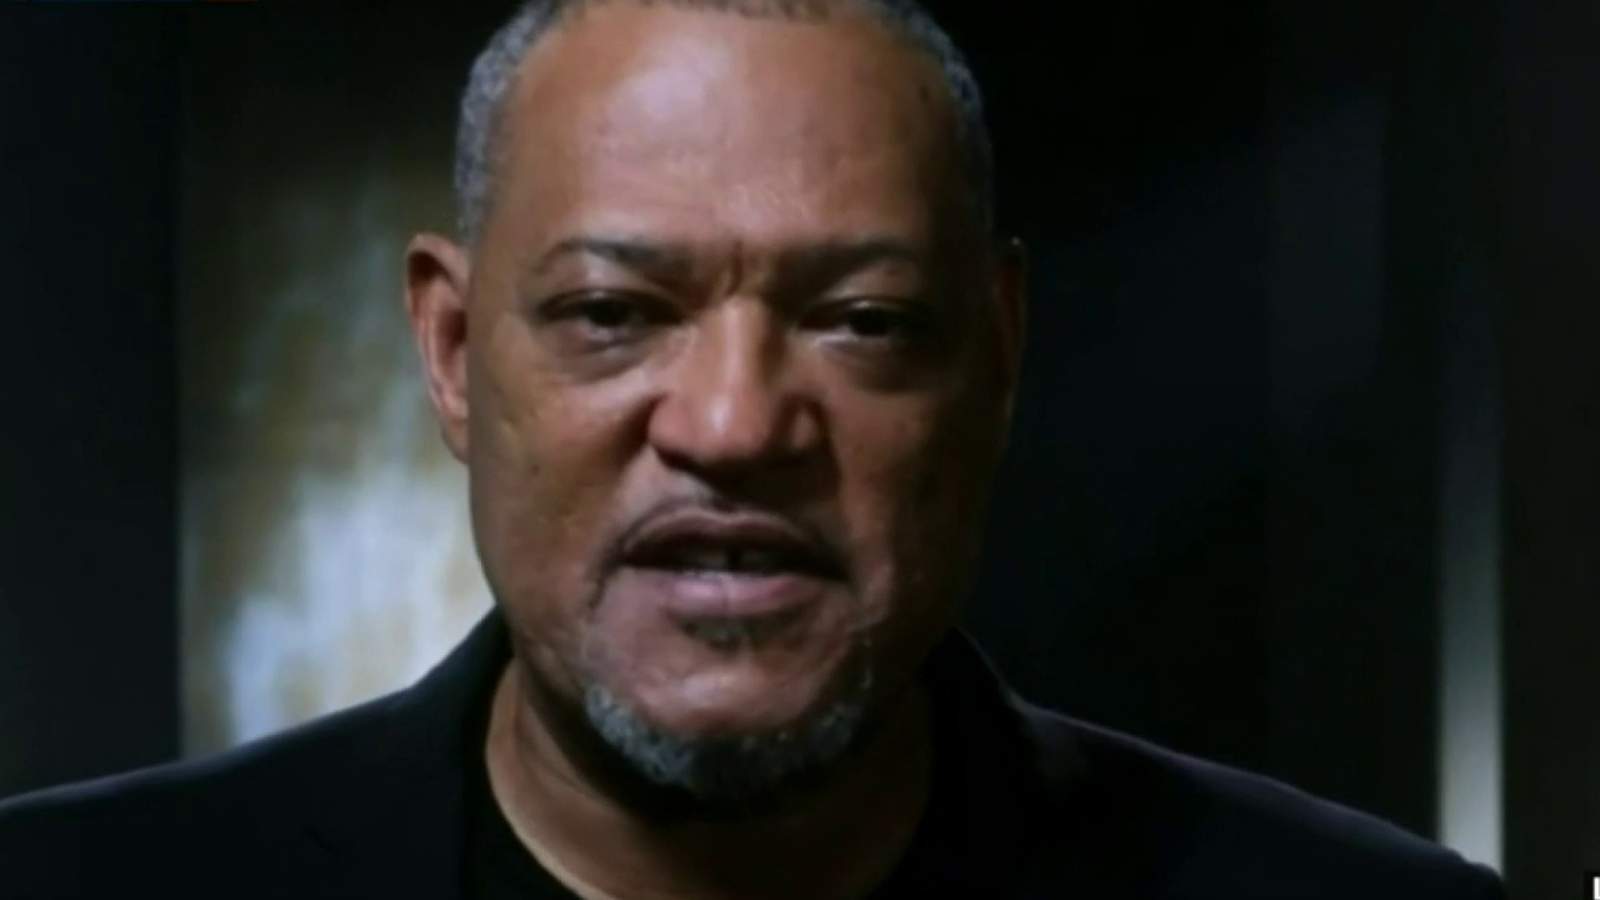 Laurence Fishburne is bringing dark mysteries to light in new show